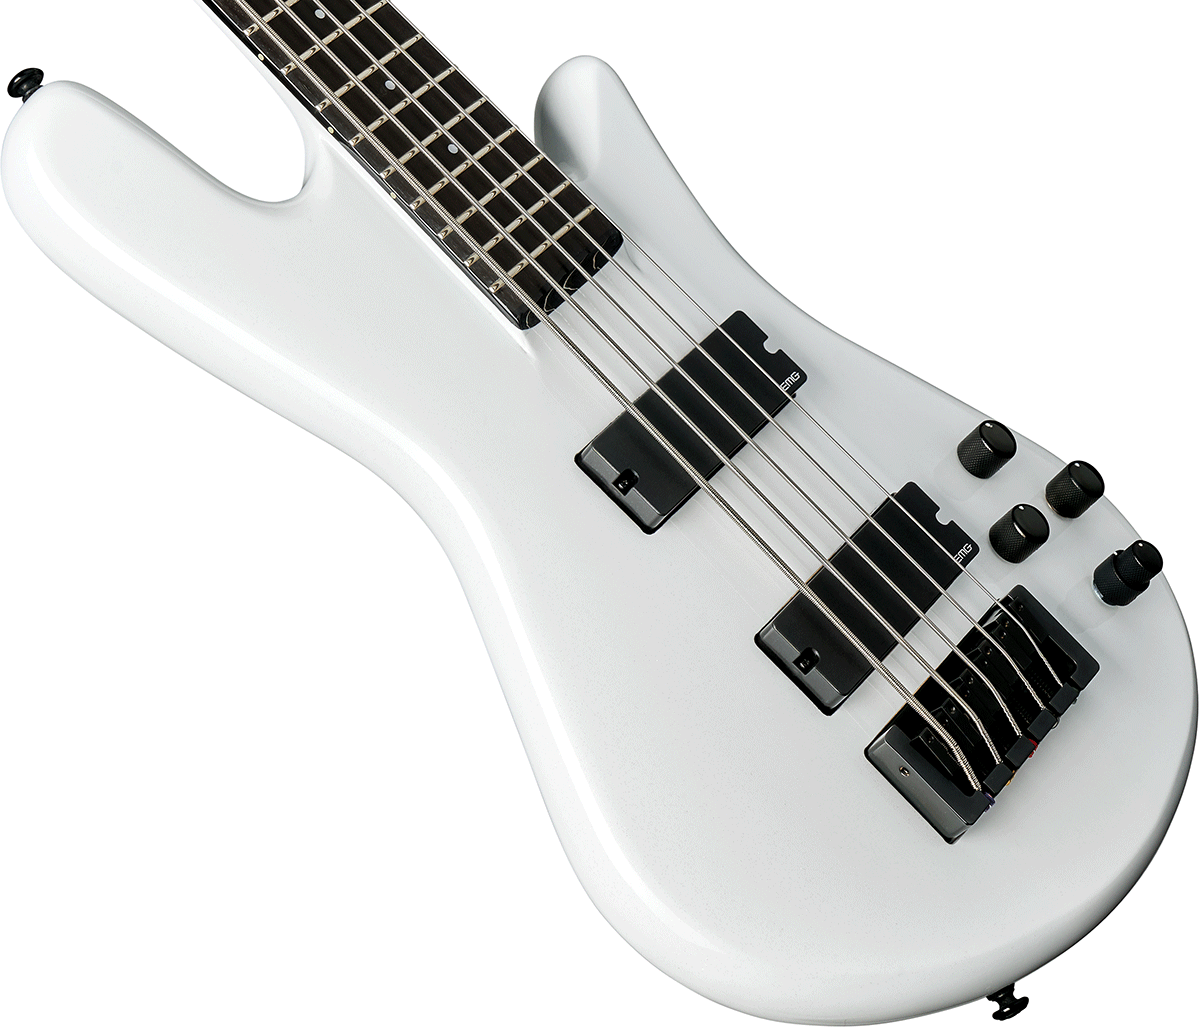 Spector Ns Ethos Hp 5 Eb - Metallic White - Solid body electric bass - Variation 2